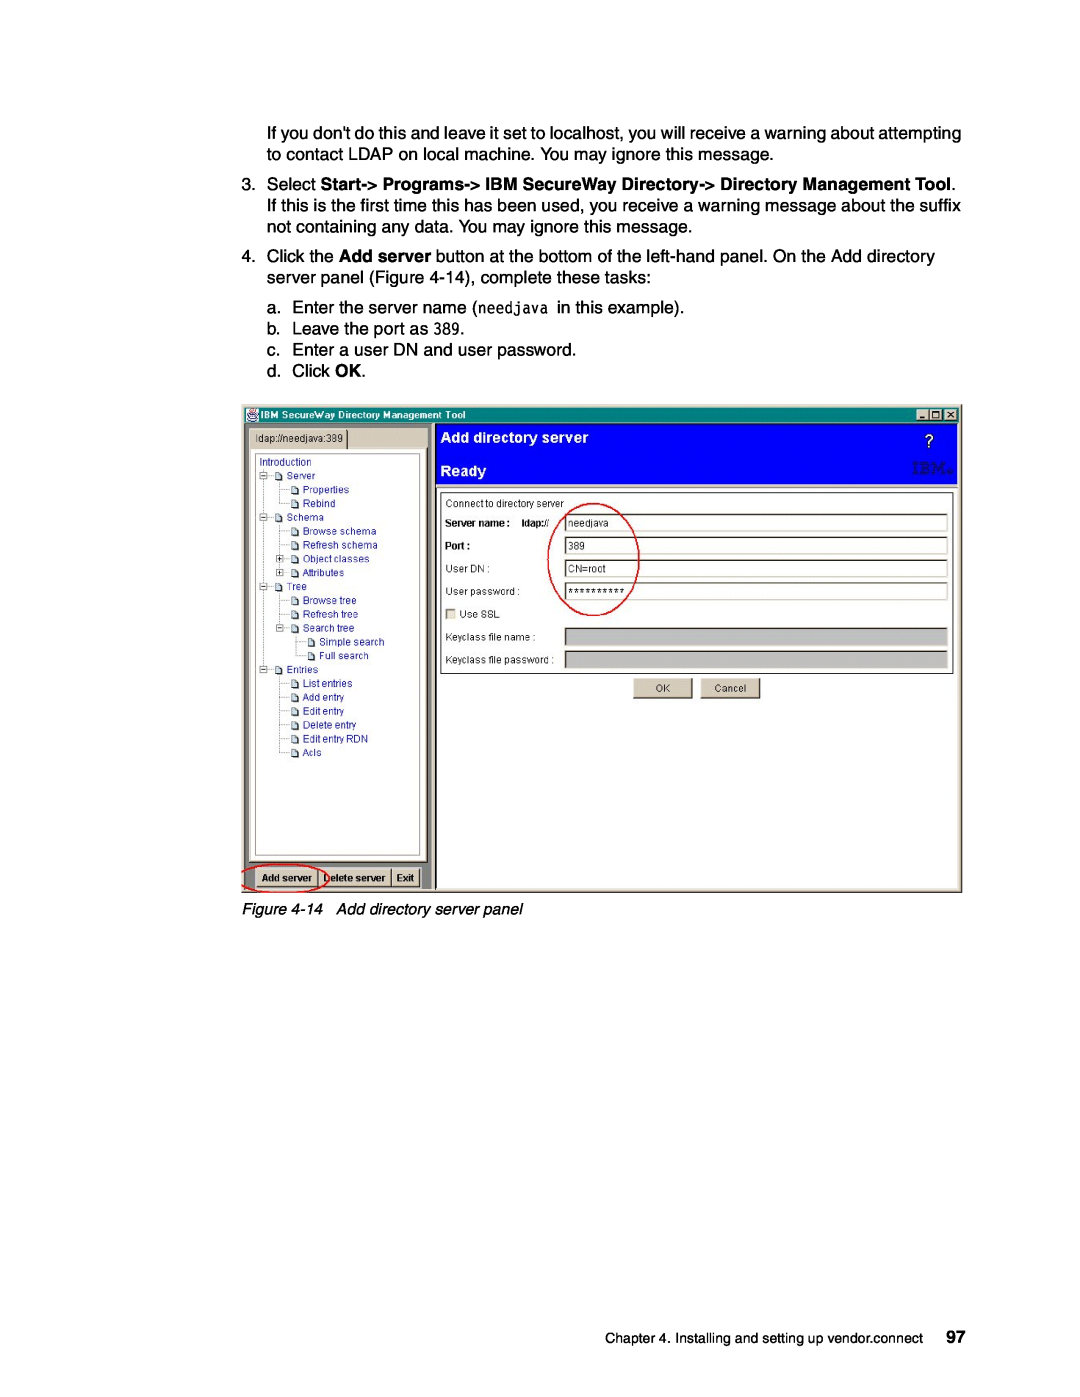 IBM SG24-6526-00 manual a. Enter the server name needjava in this example 